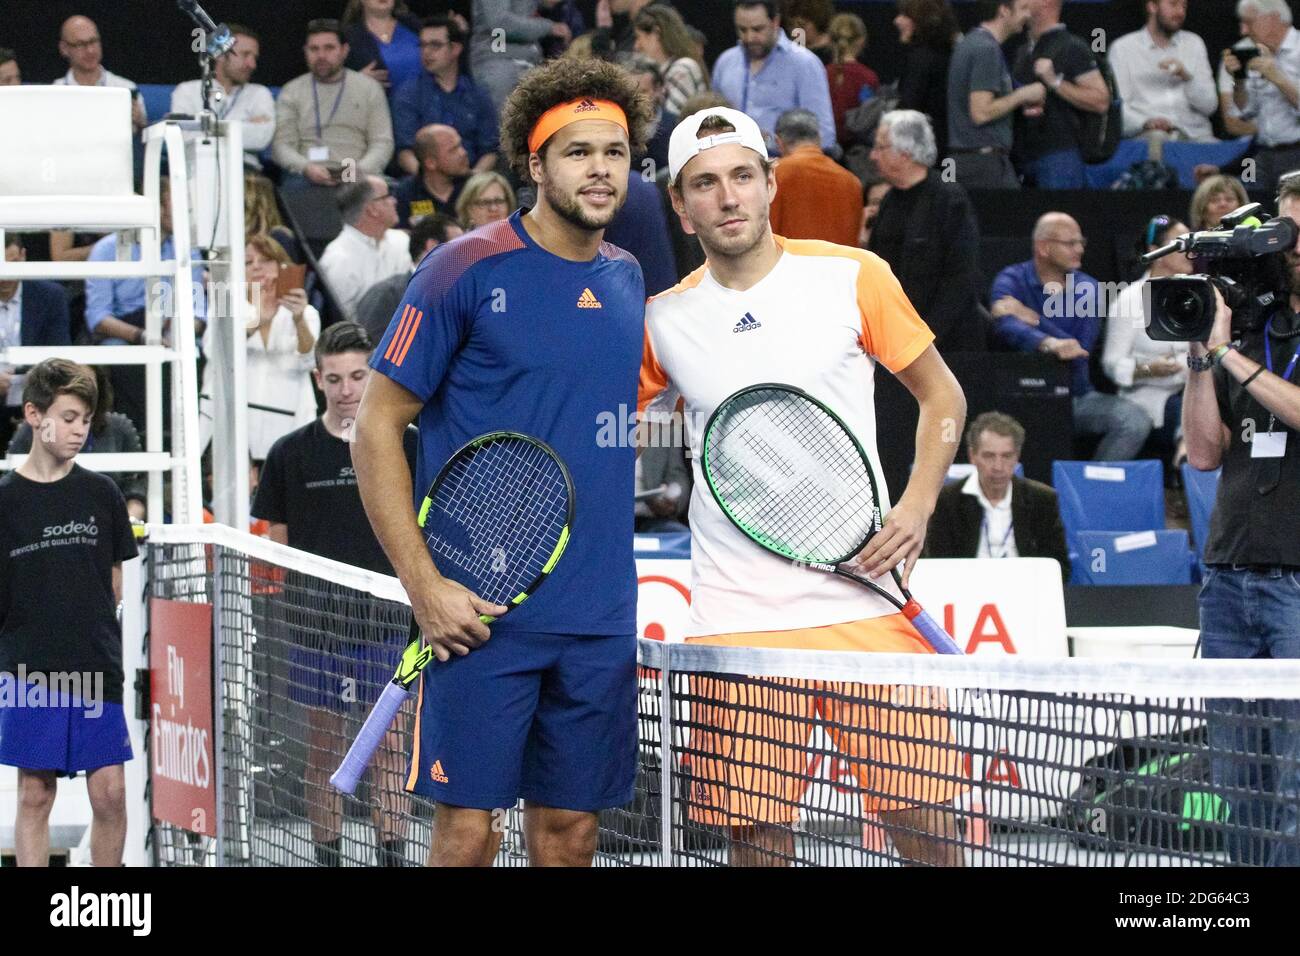 French Jo-Wilfried Tsonga defeats, 6-4, 6-4, his compatriot Lucas Pouille  in their Men's Singles Finals of the 2017 Open 13 Tennis tournament, his  third victory in Marseille, at the Palais des Sports